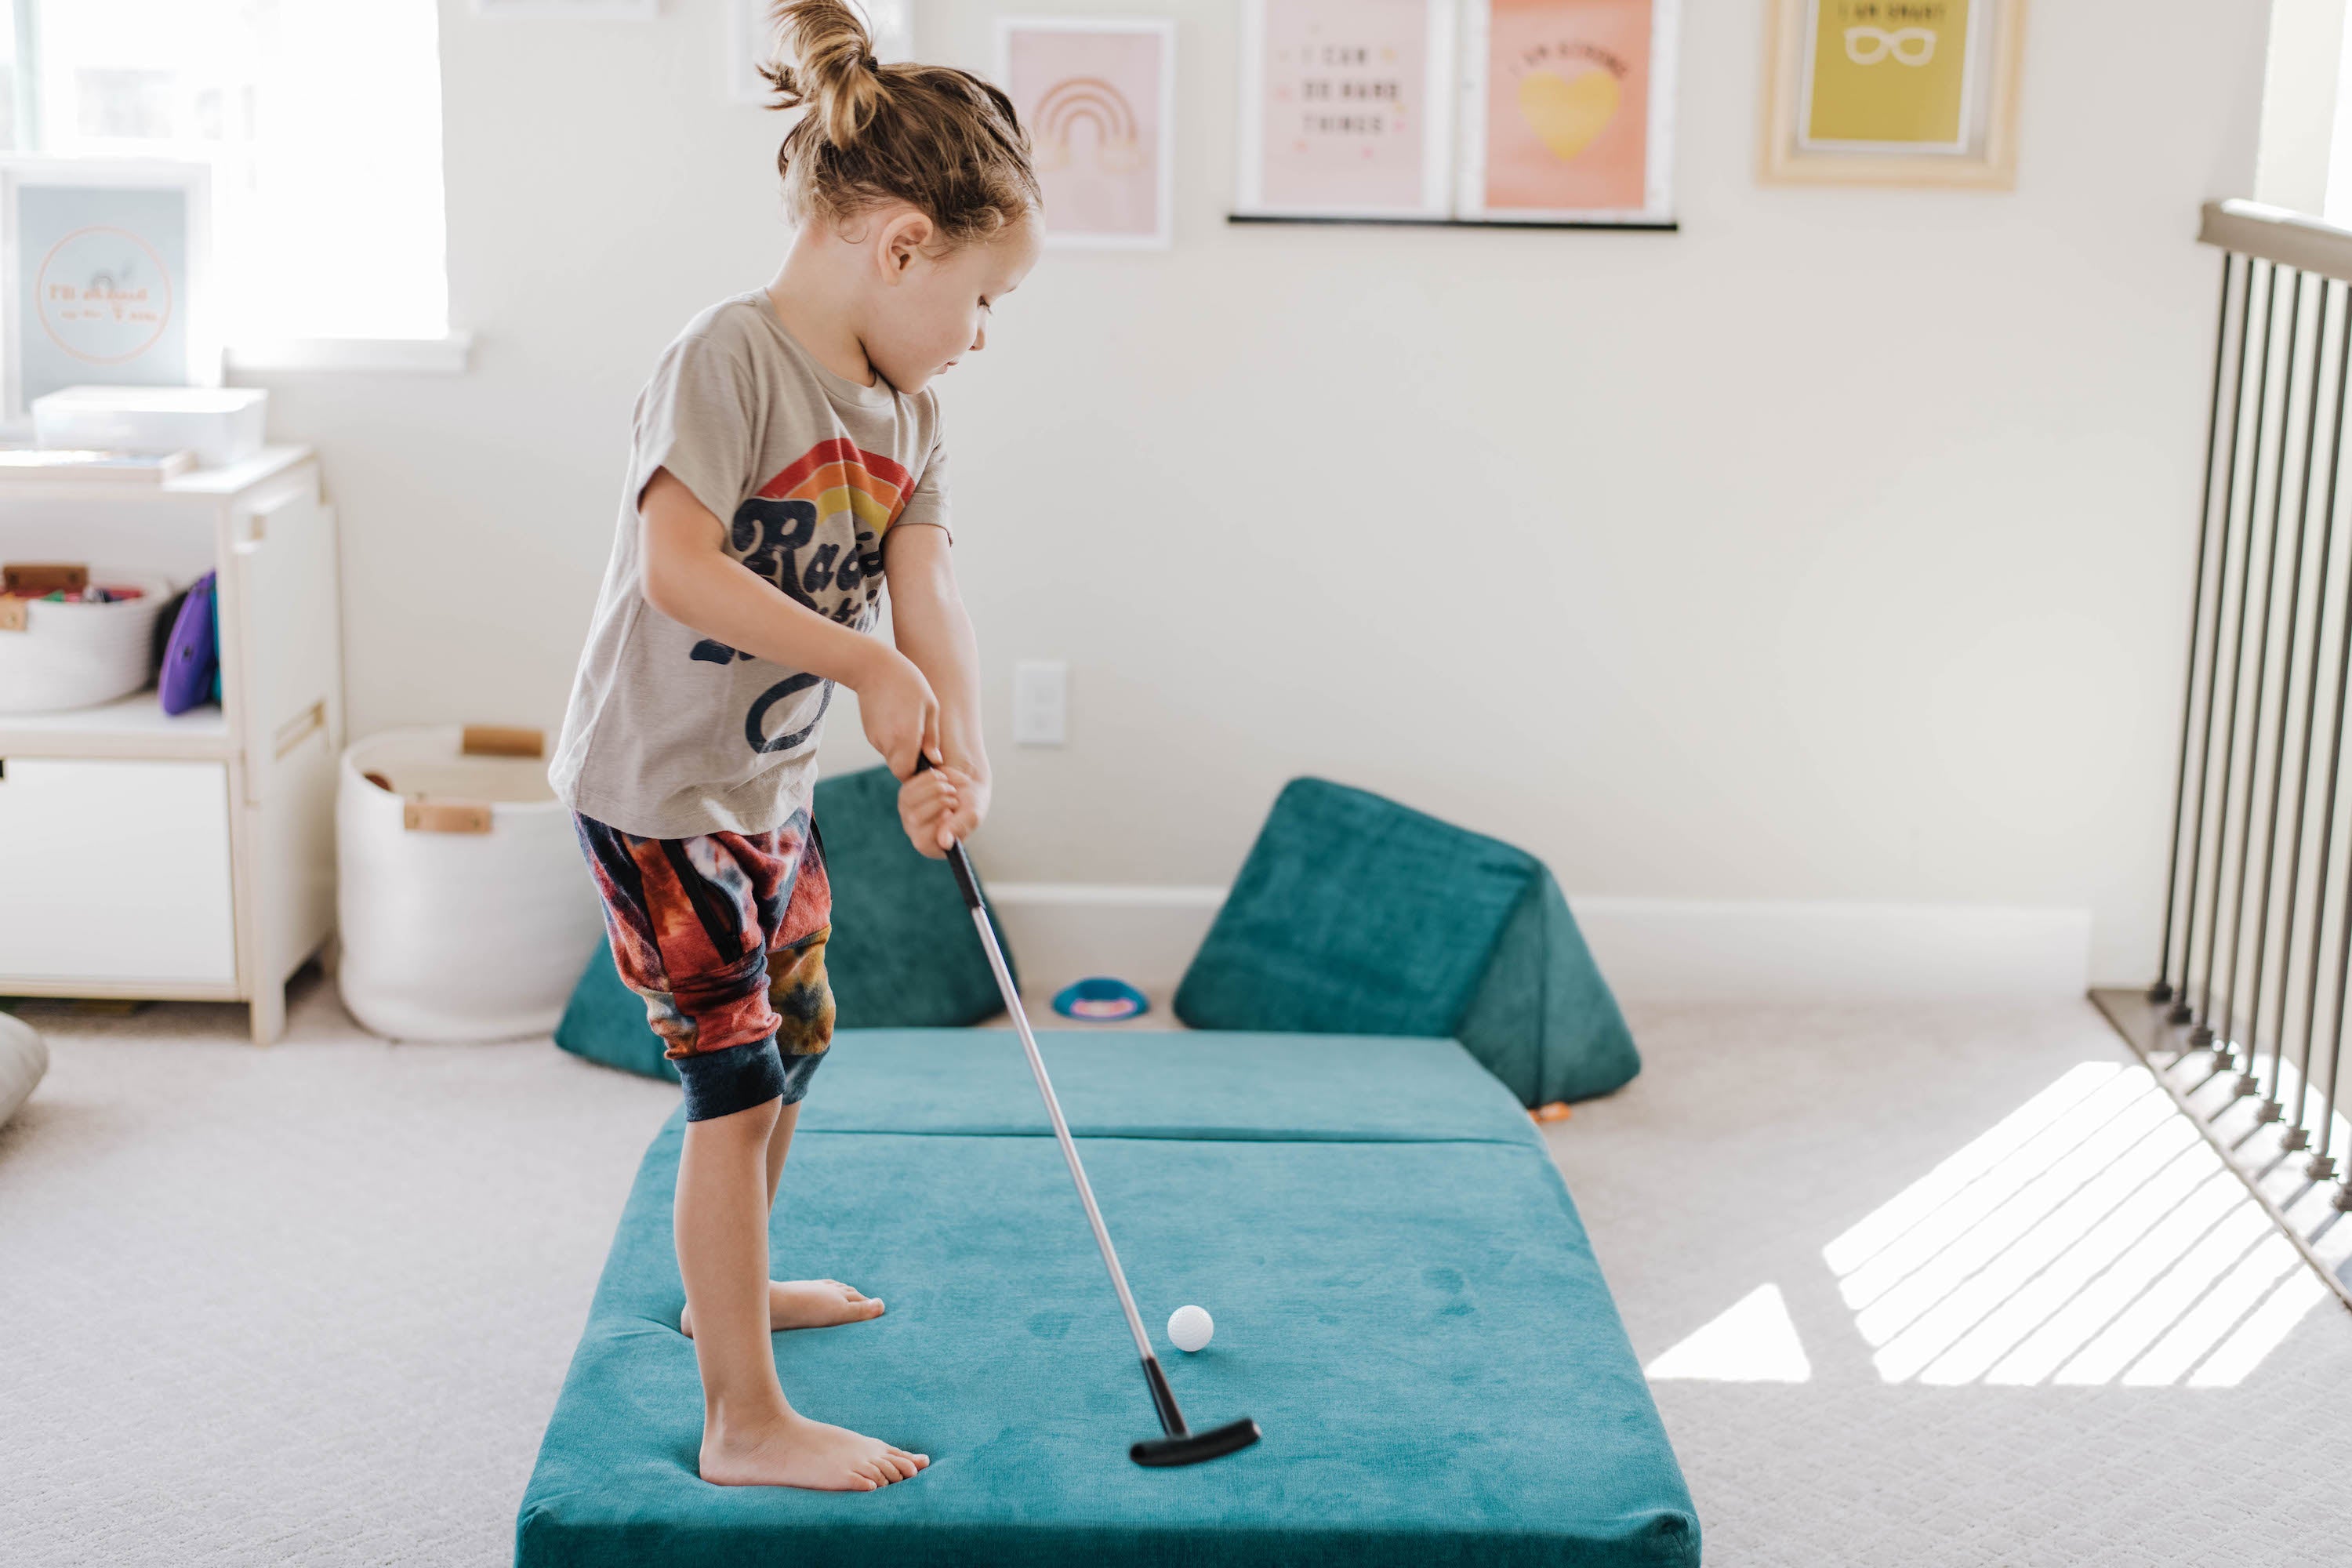 Child standing on an Atlantis Nugget, holding a golf club and aiming for a "hole" between two Nugget pillows